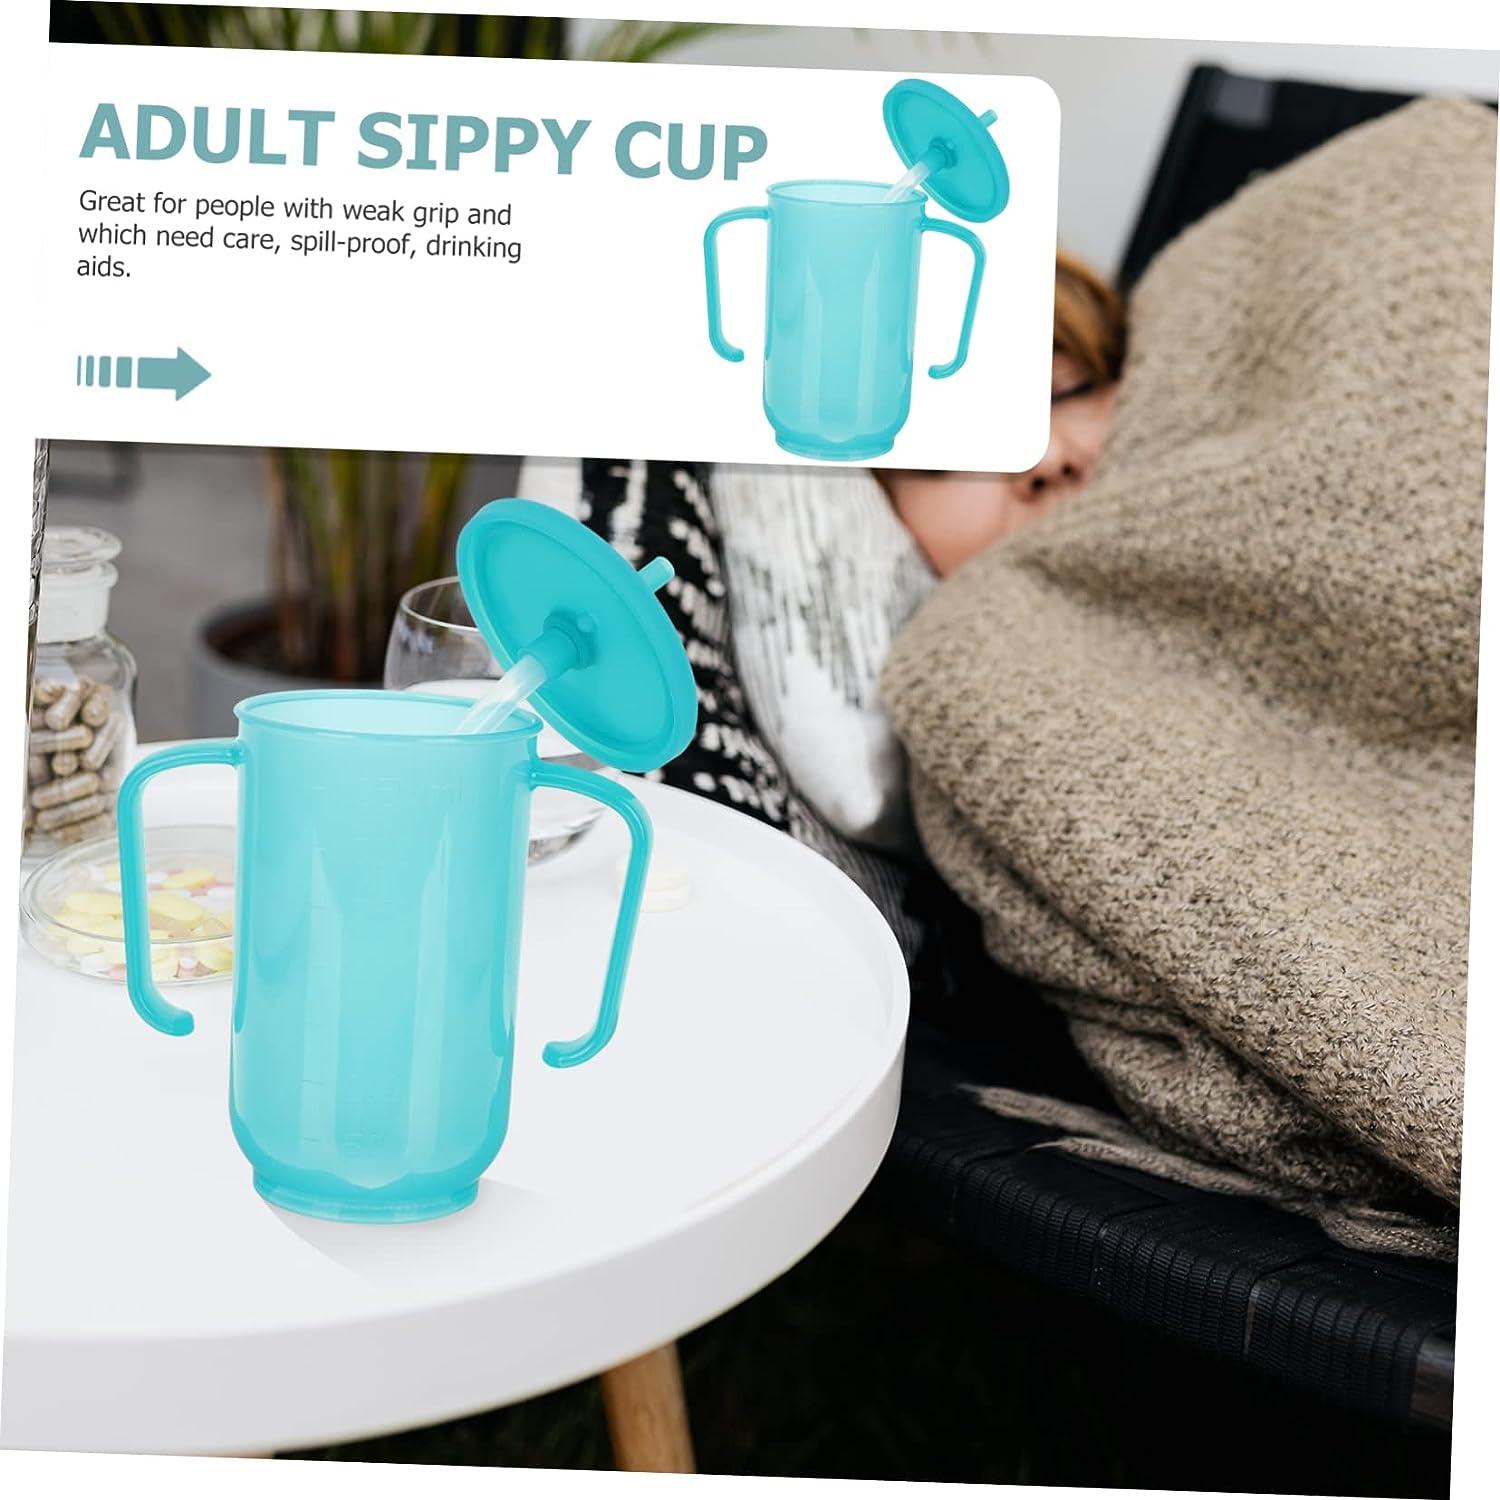 Hangover-Inspired Sippy Cups : spill-proof cup